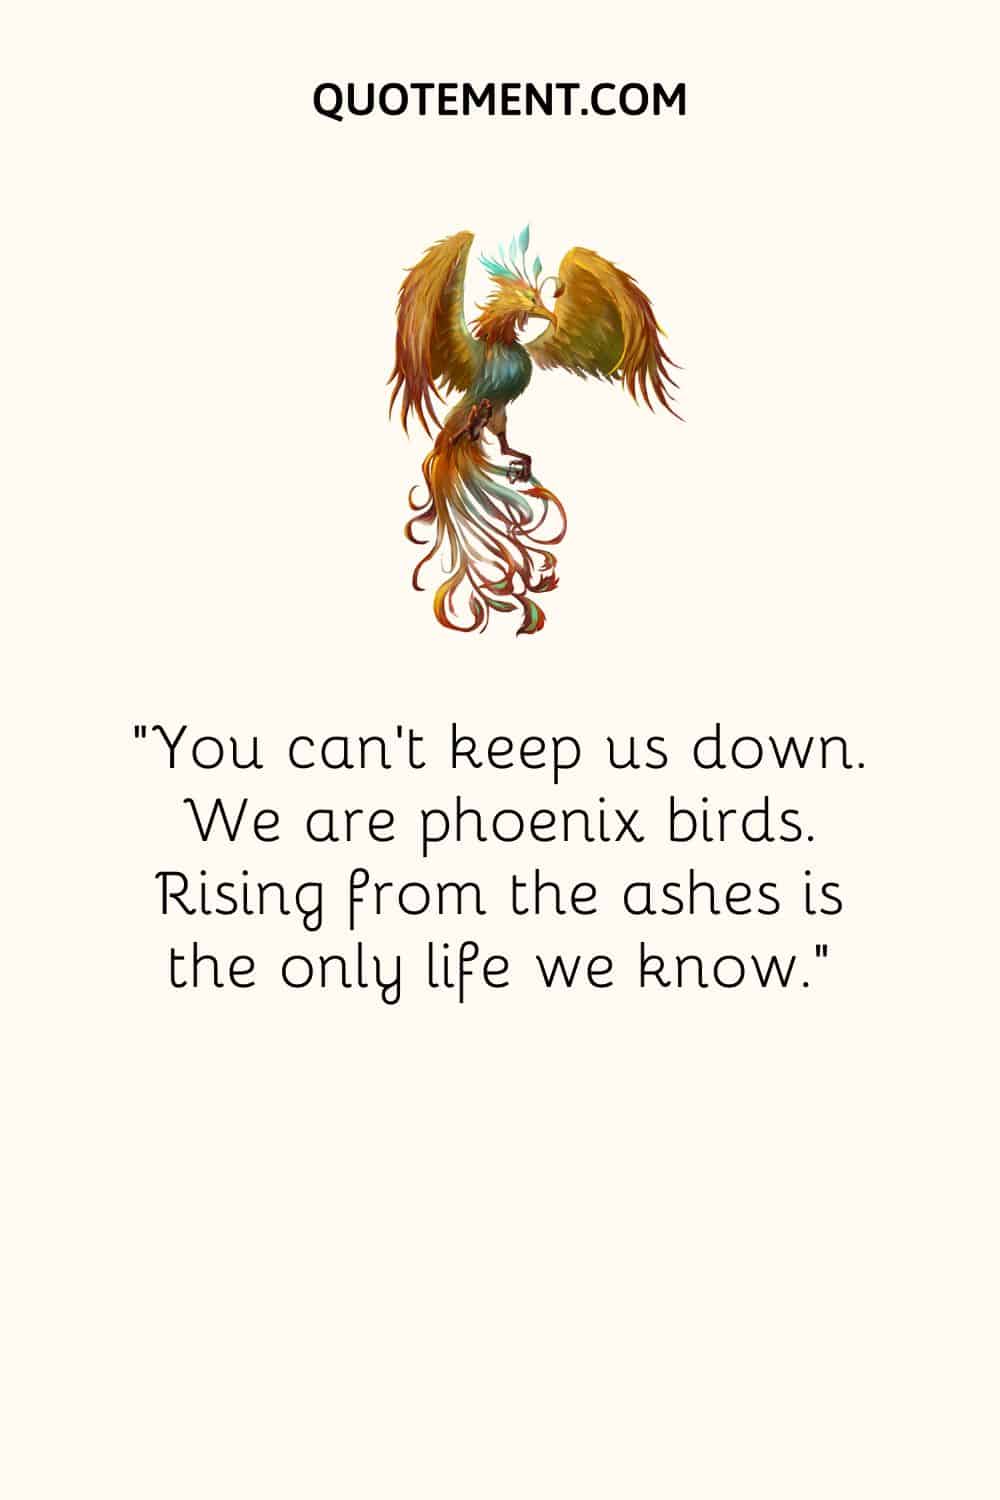 Encouraging phoenix rises from the ashes quote and phoenix.